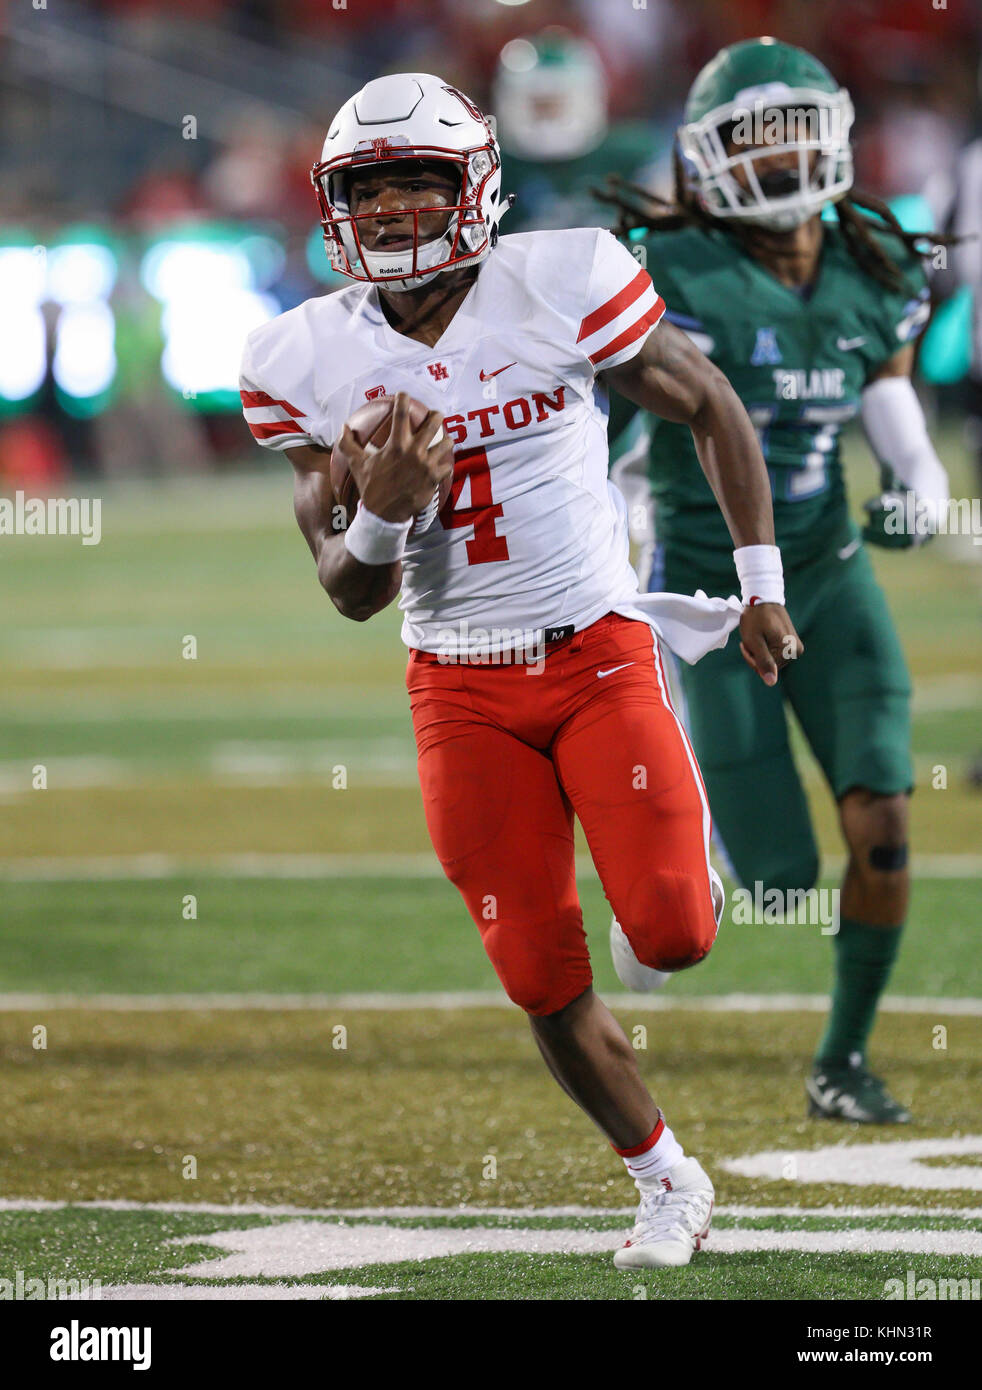 New Orleans, LA, USA. 18th Nov, 2017. Houston QB D'Eriq King #4 runs towards the end zone on a big run during the NCAA football game between the Tulane Green Wave and the Houston Cougars at Yulman Stadium in New Orleans, LA. Kyle Okita/CSM/Alamy Live News Stock Photo